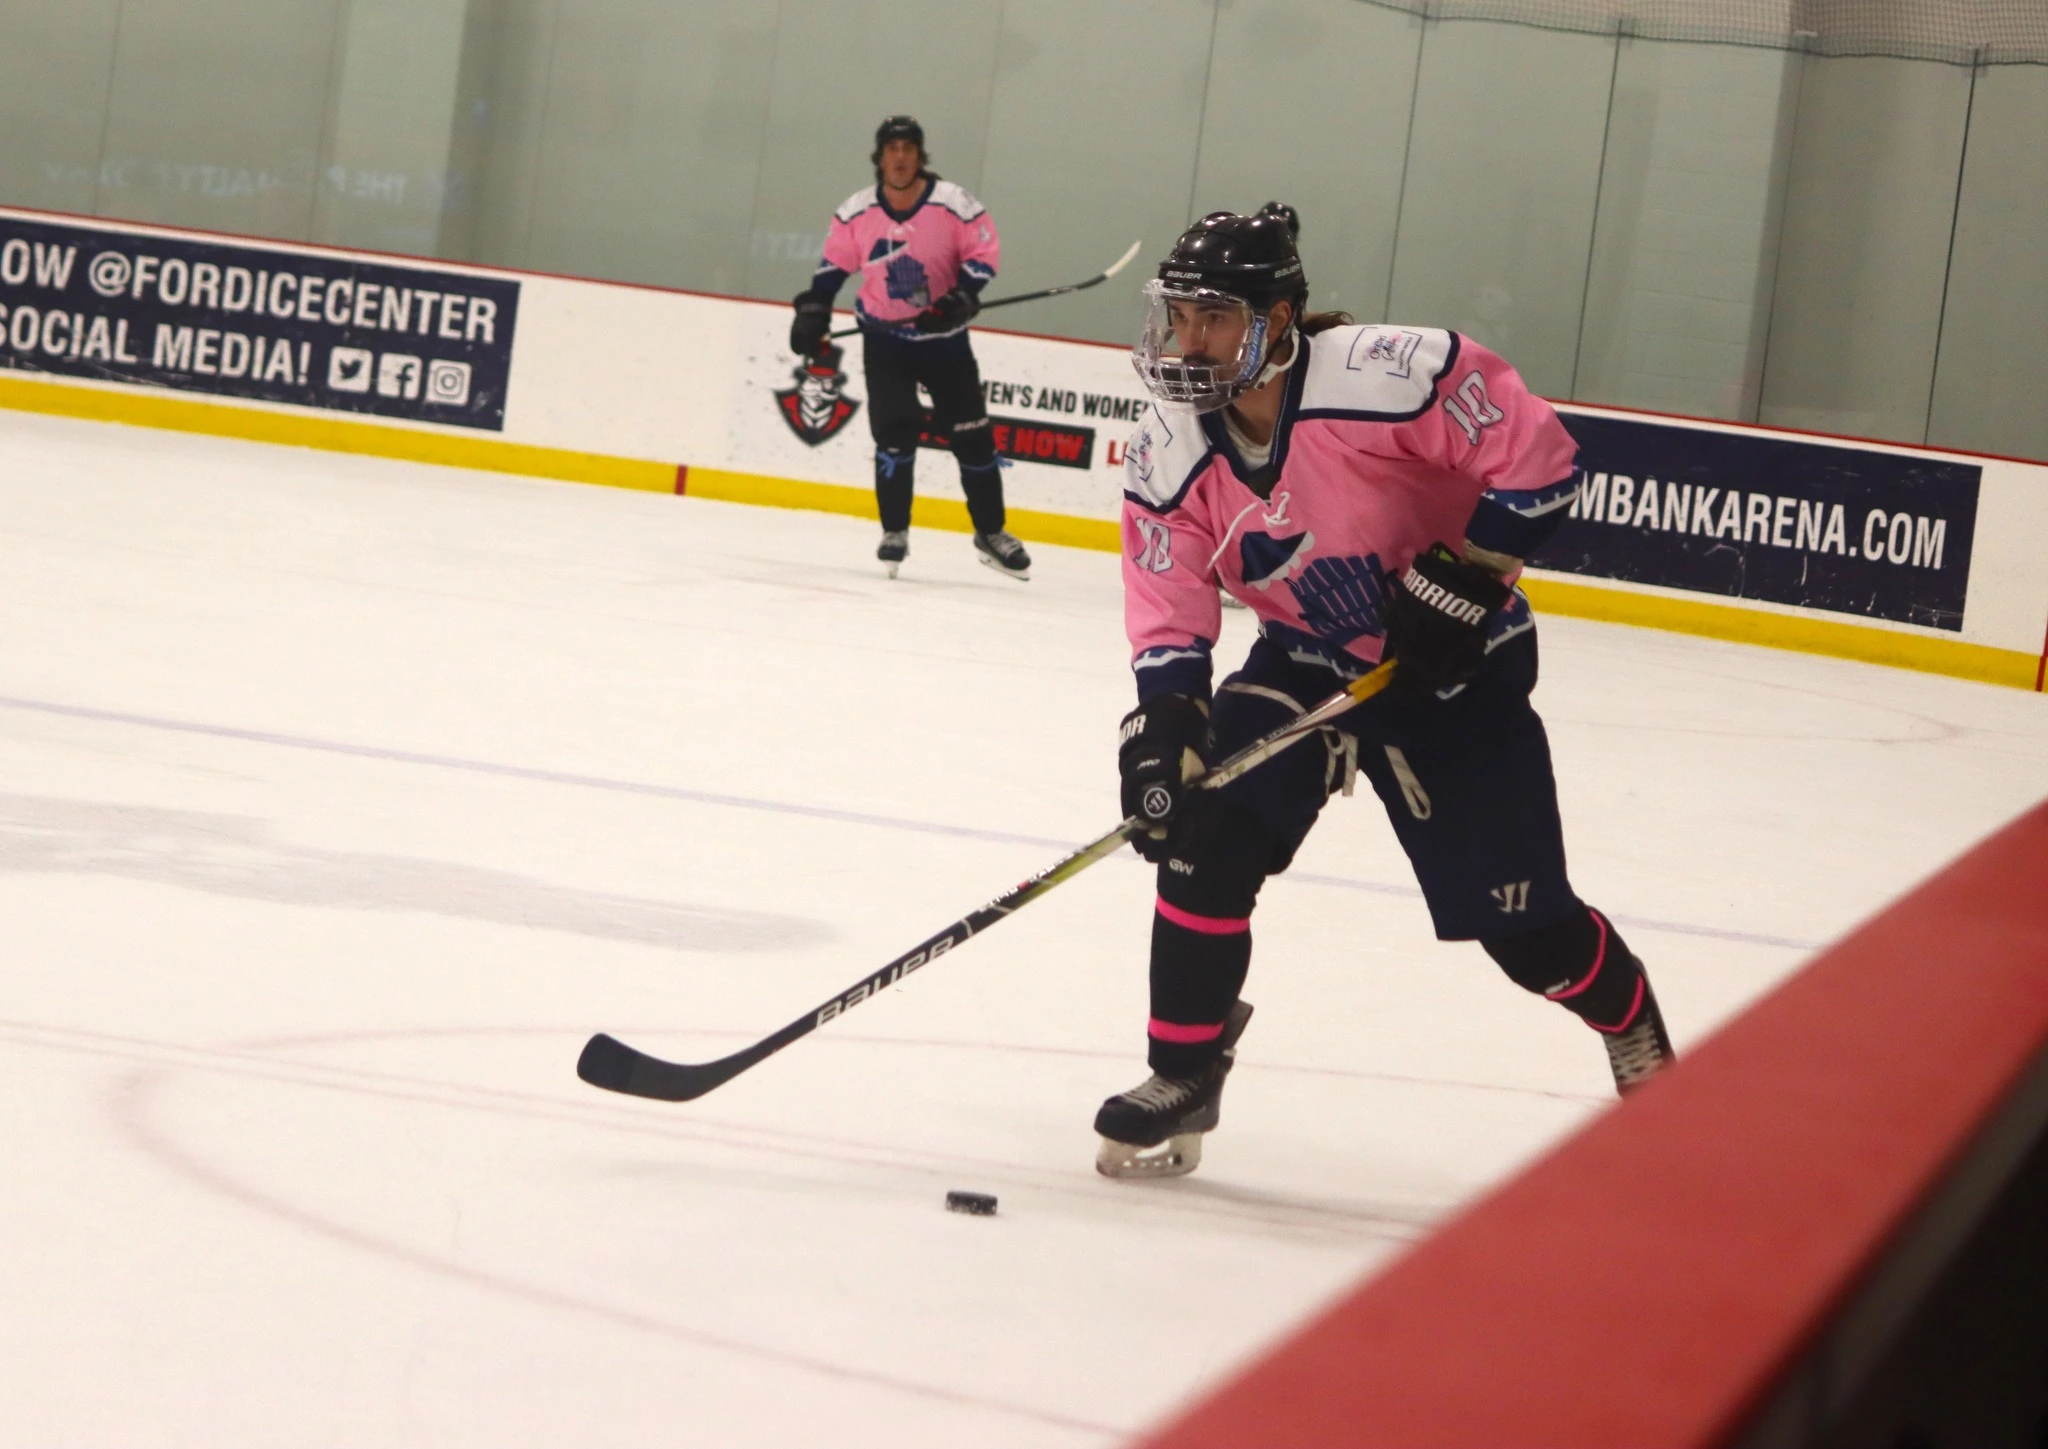 Dalton Henderson in pink jersey skating with the puck.